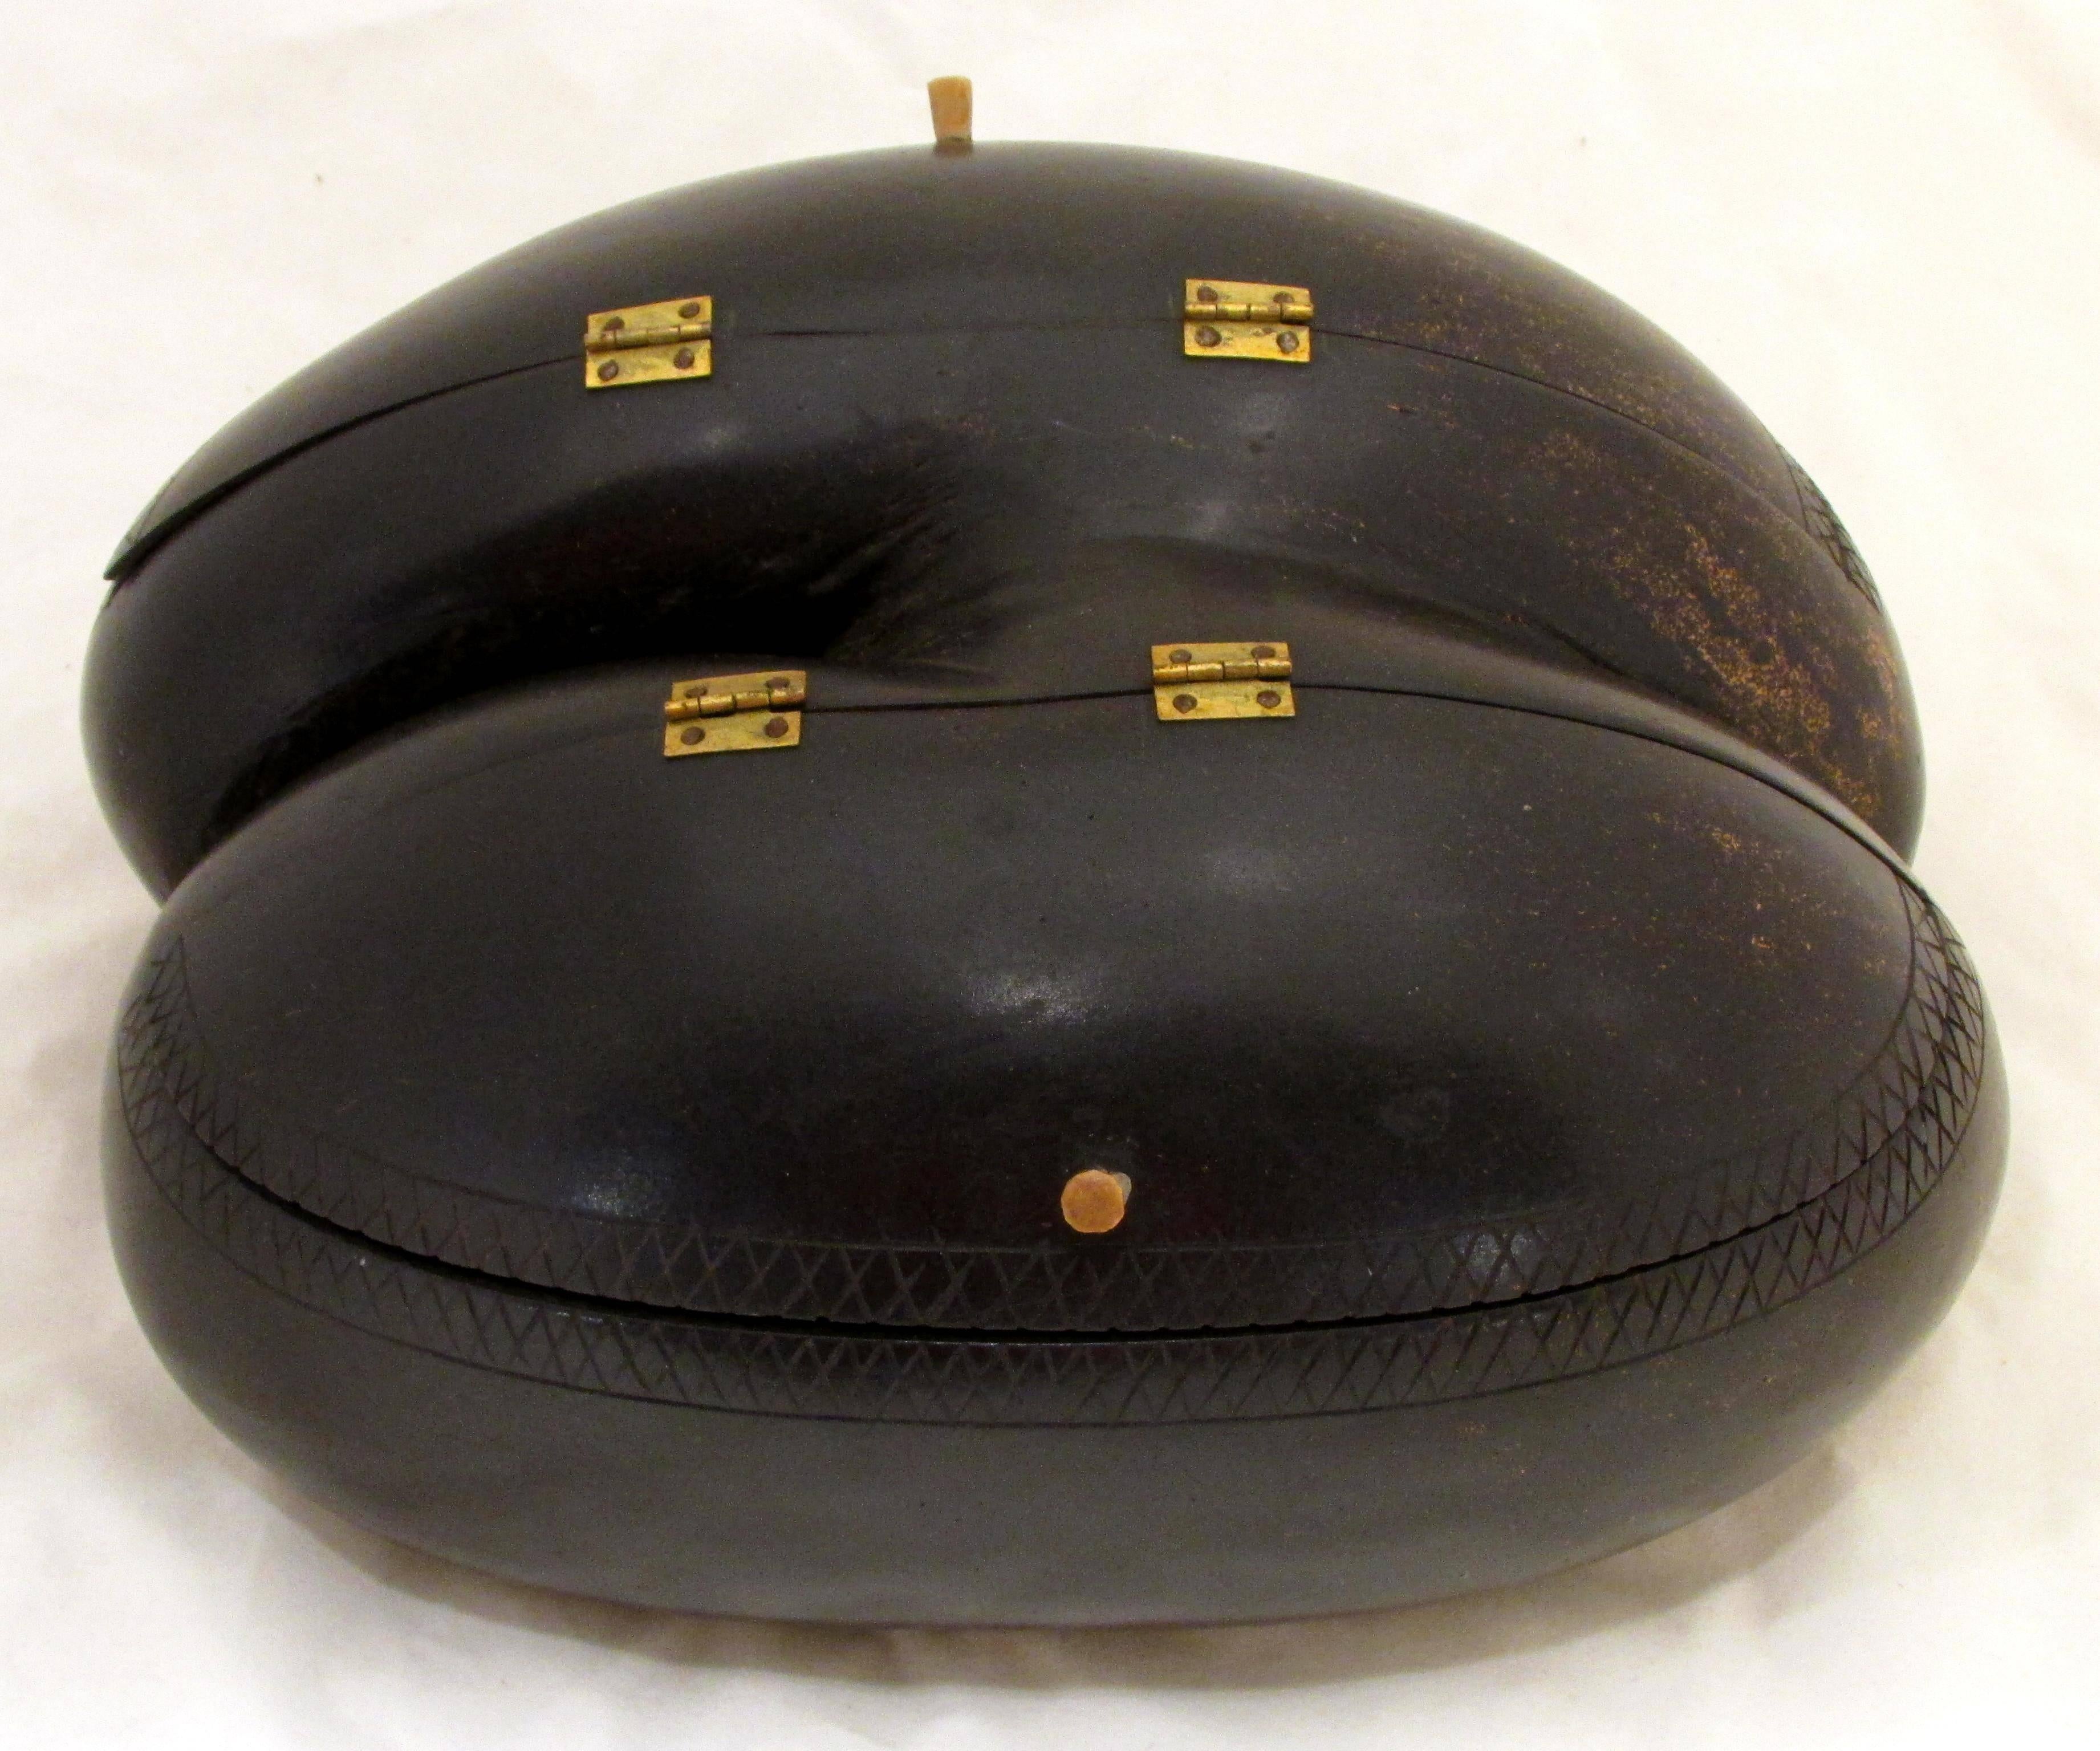 Rare Coco De Mer or double coconut which has been turned into a box with two brass hinged lid openings with small wooden handles coconut has some carving details.